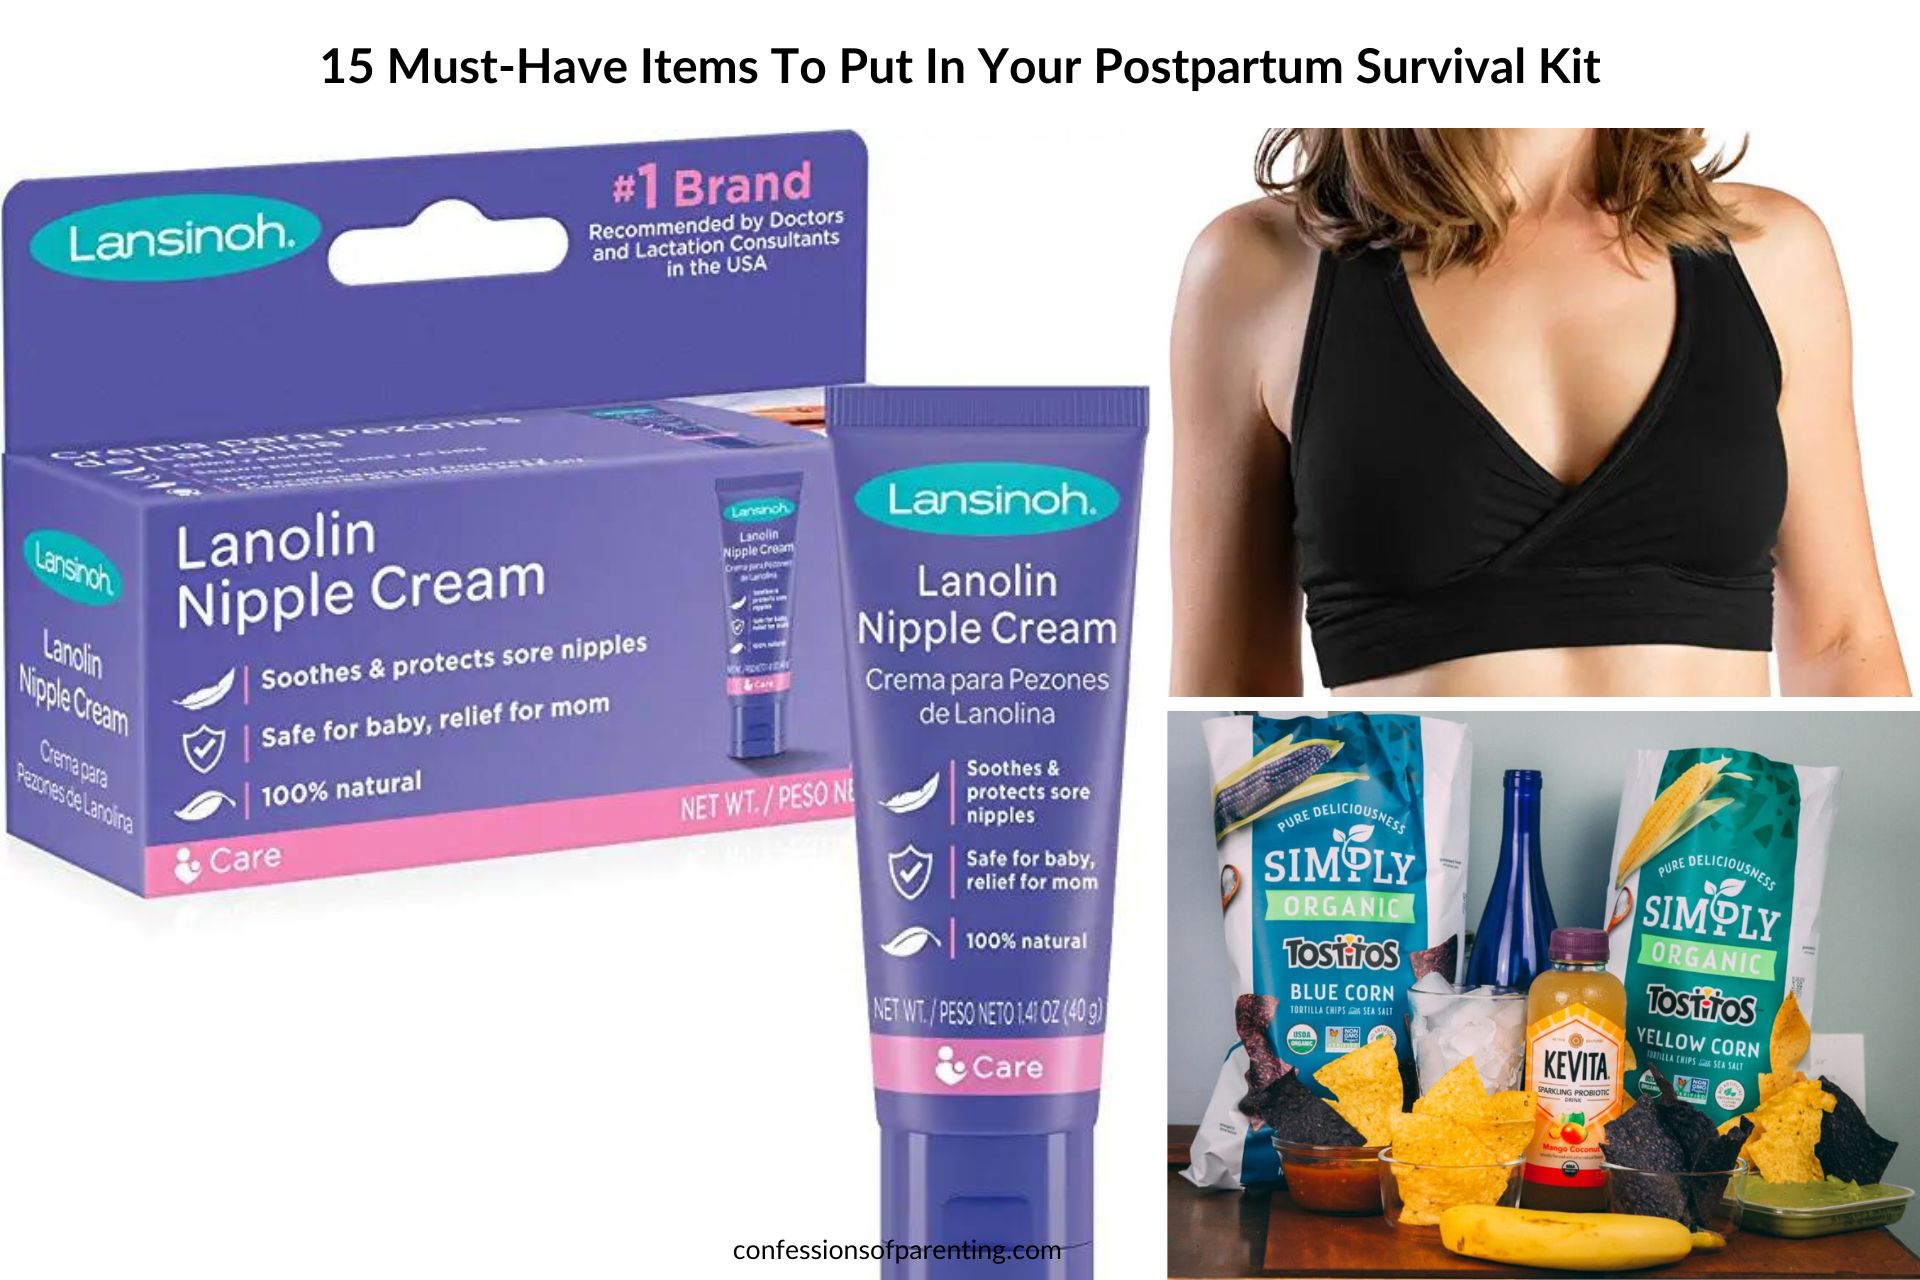 feature image: 15 Must-Have Items To Put In Your Postpartum Survival Kit